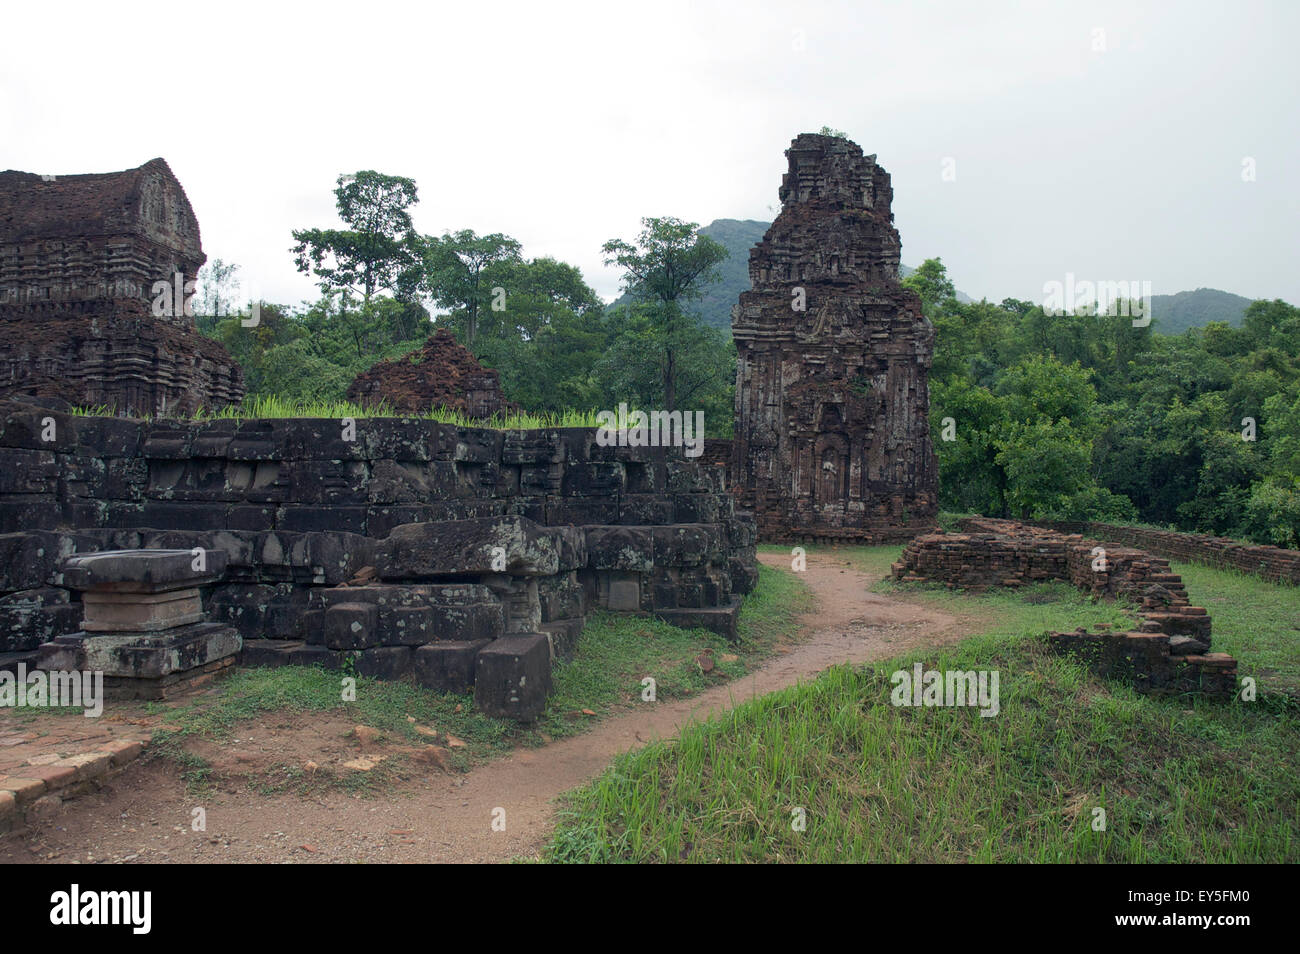 Ruins of the My Son Hindu temple complex, Quang Nam Province, Vietnam Stock Photo